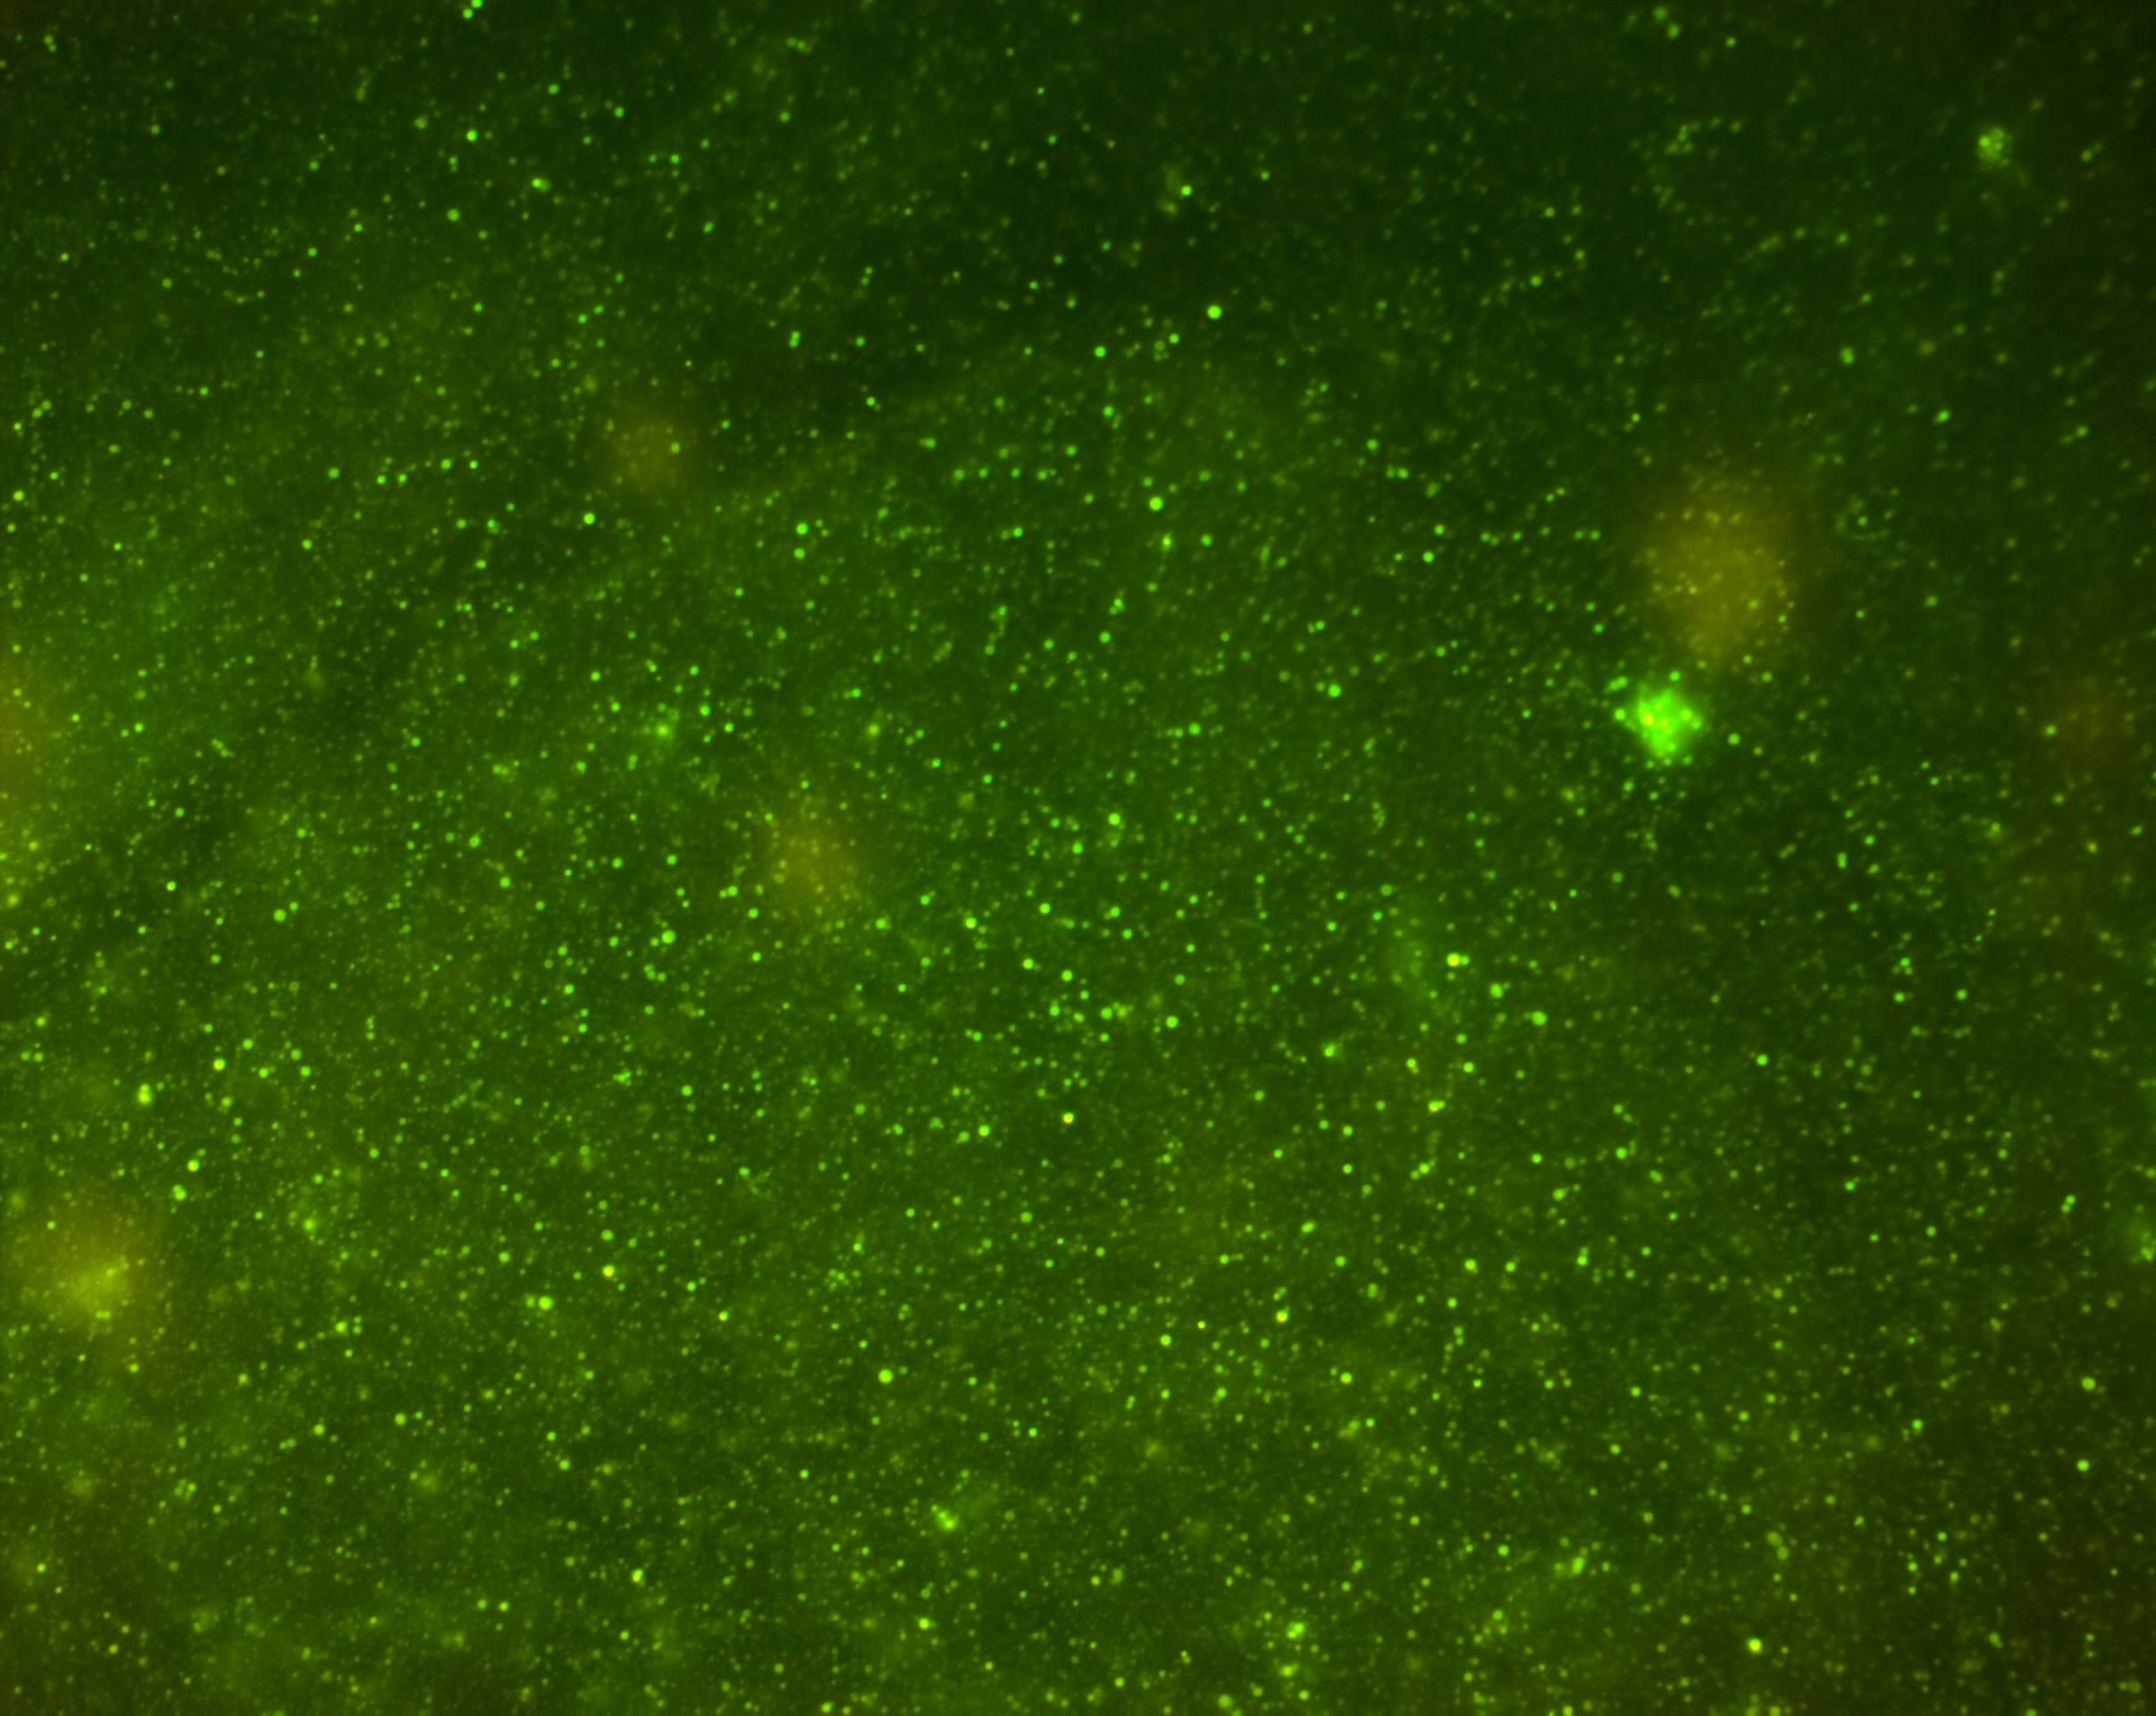 Micrography, microphotography of vesicles, particles or green fluorescent cells for scientific research, taken under a high-tech microscope. Fluorescence of curcumin and other fluorophores of interest | Image Credit: © DavidBautista - stock.adobe.com